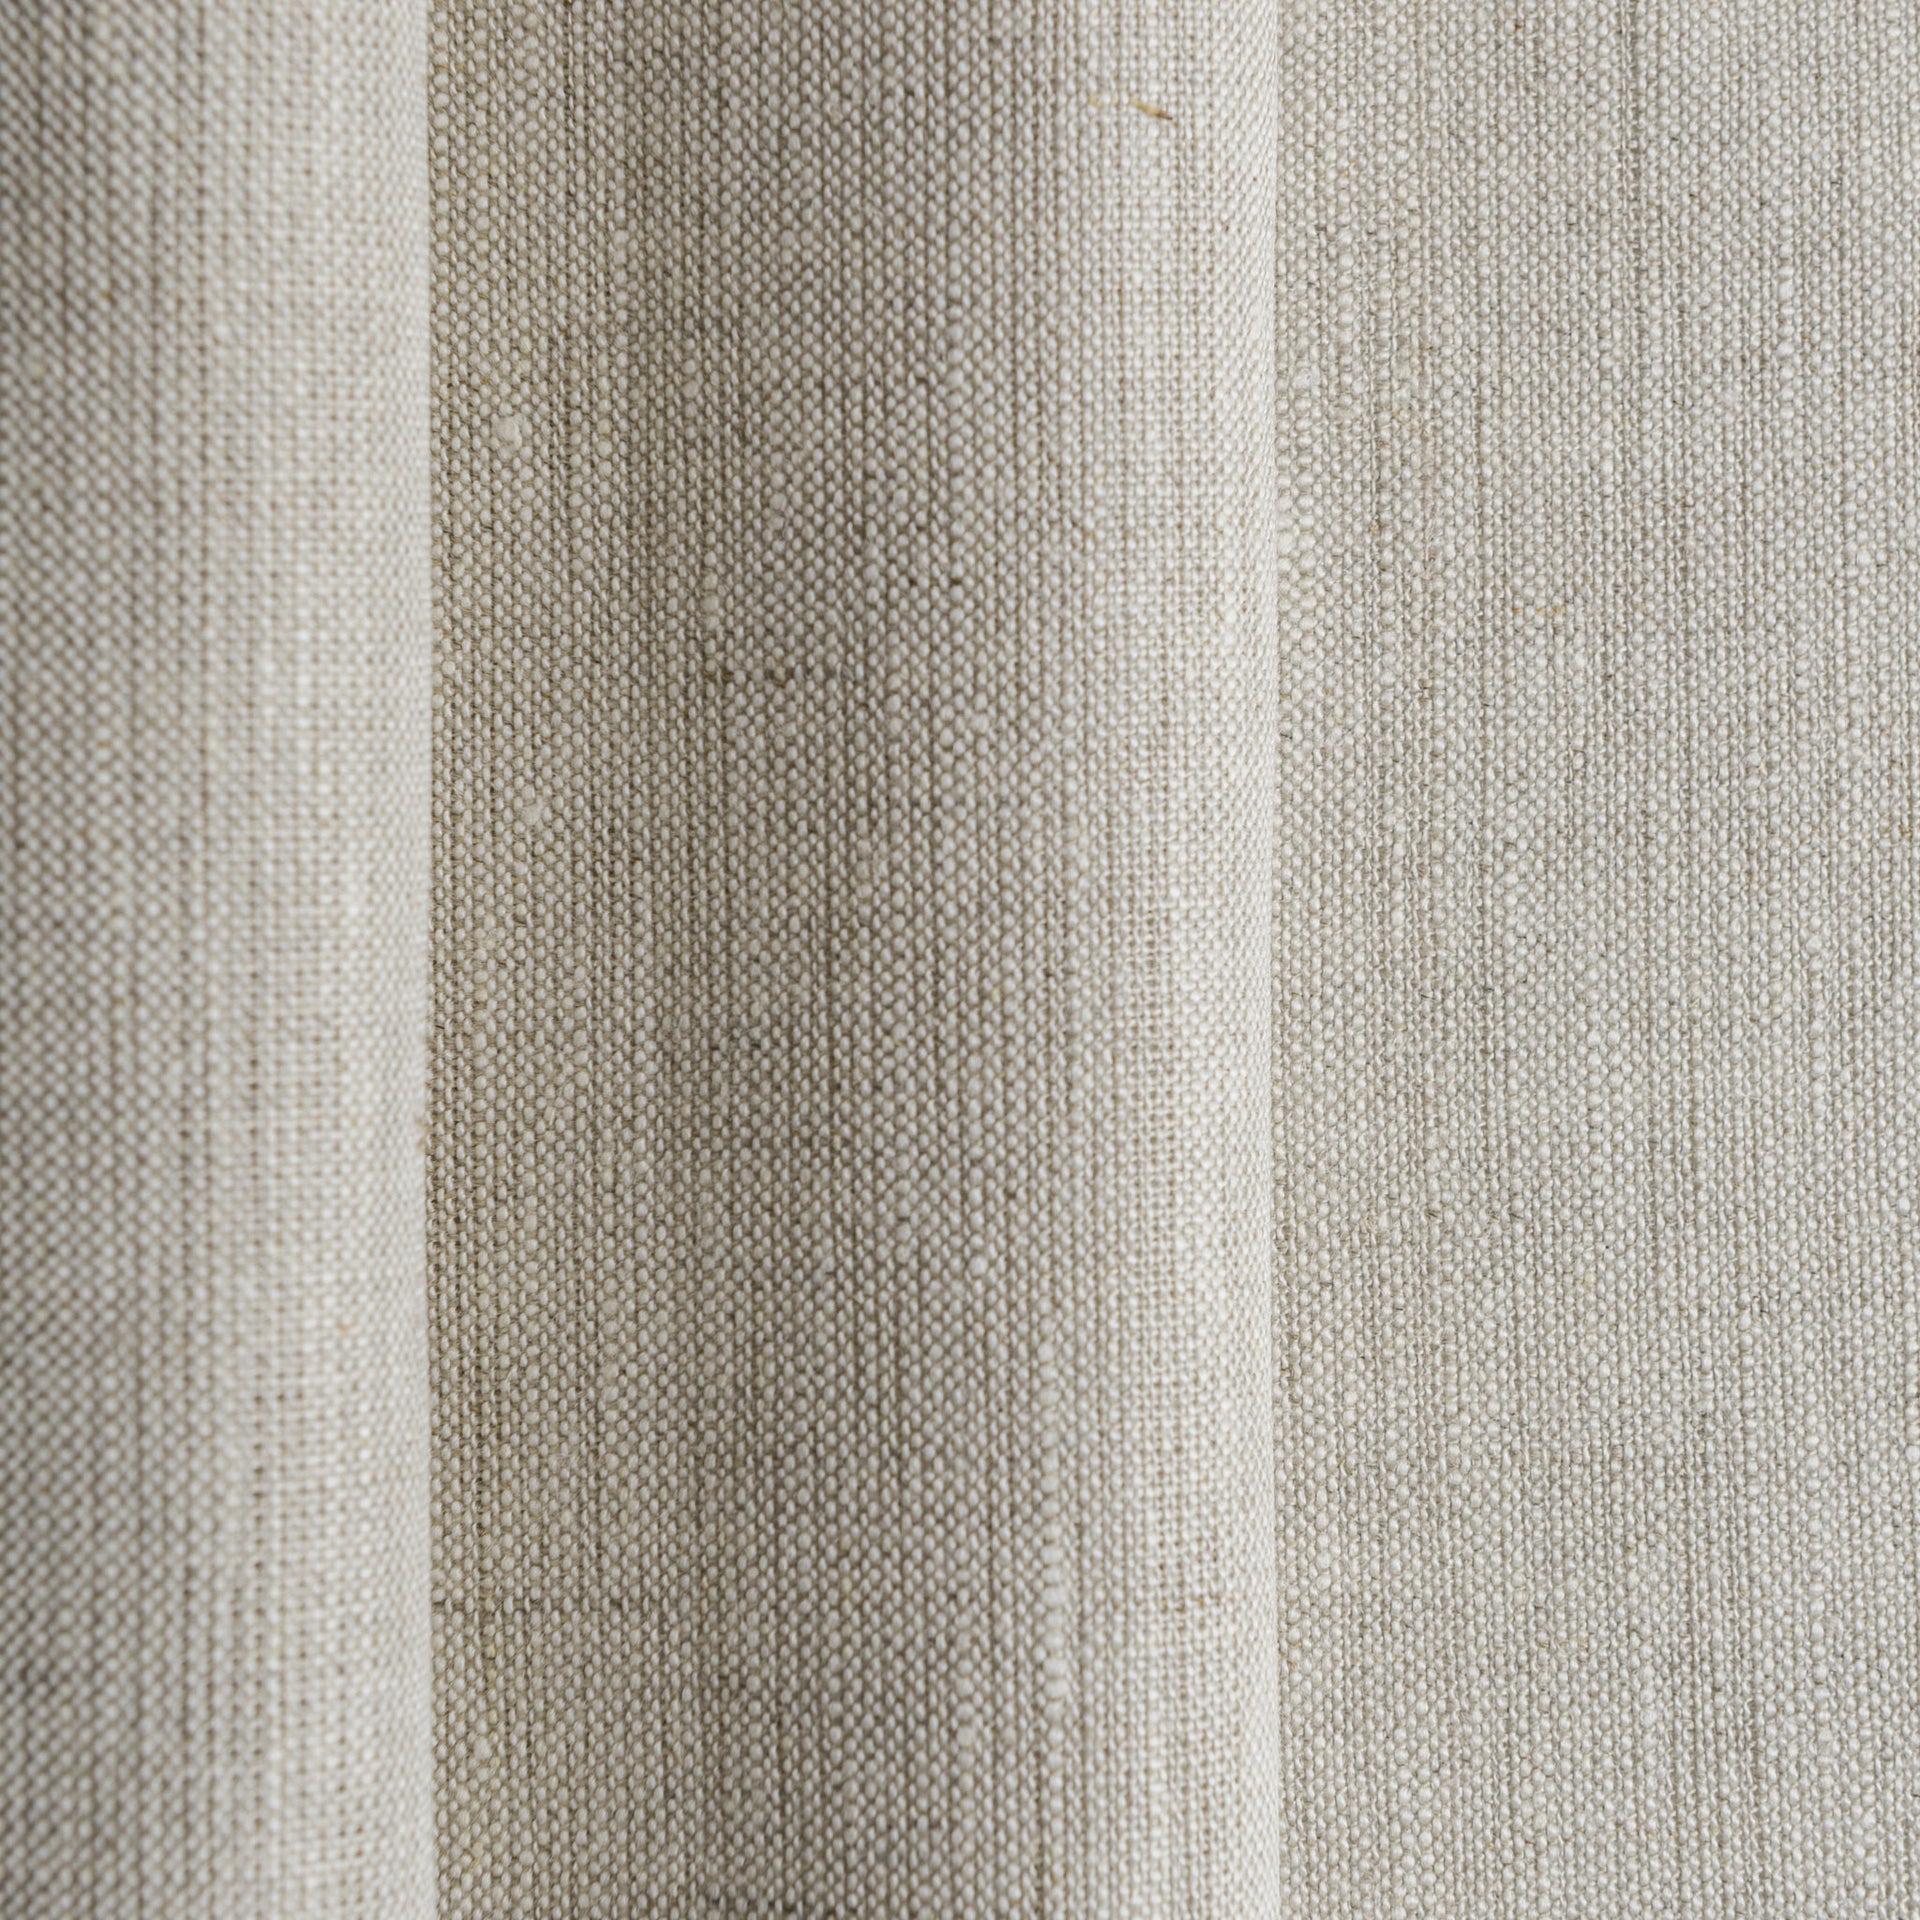 Natural Medium Weight Linen Fabric by the Yard - 100% French Natural - Width 52”- 106”